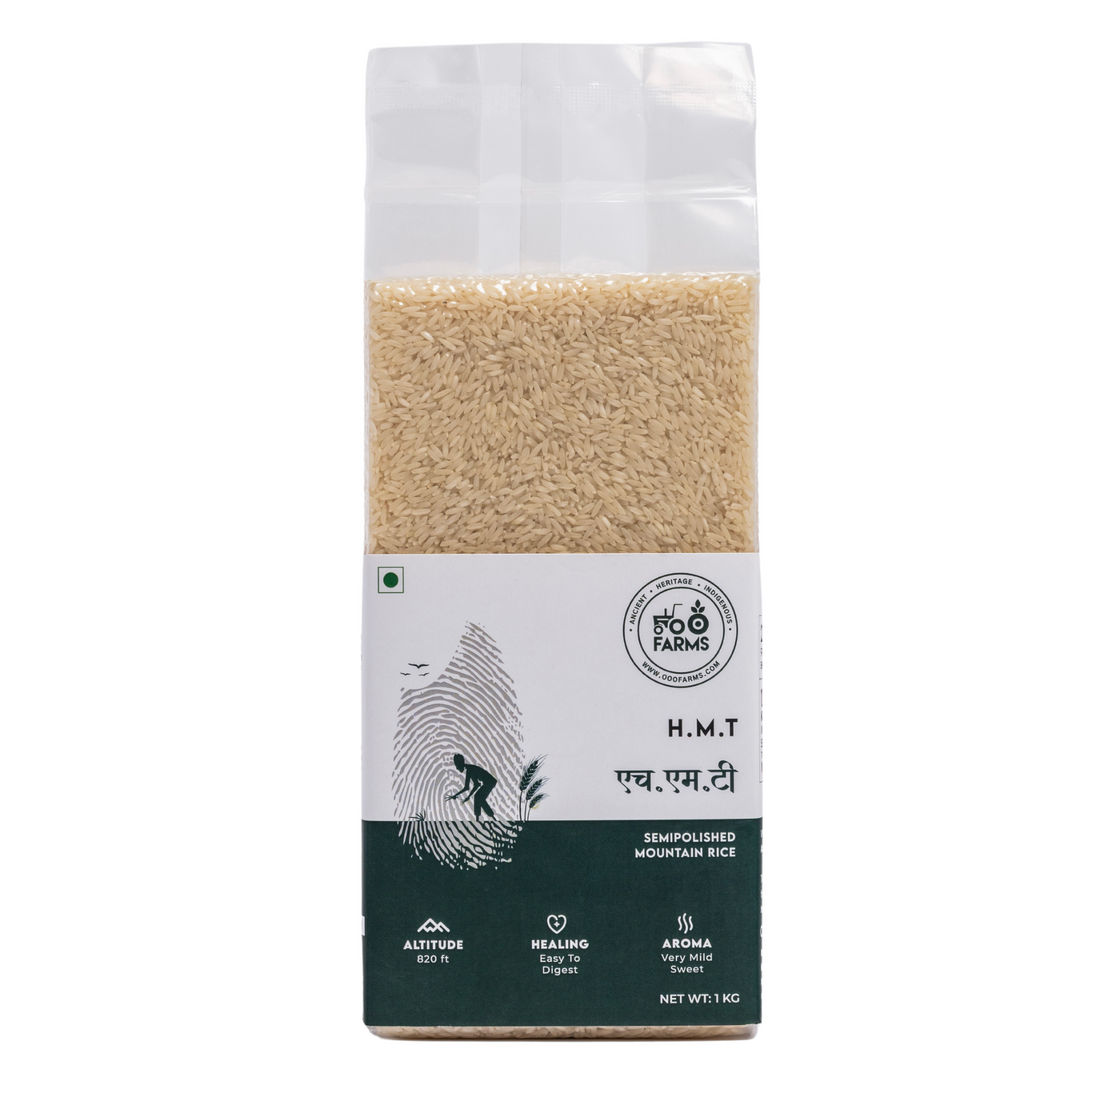 OOO Farms HMT Rice (Semi Polished) Package Frontside